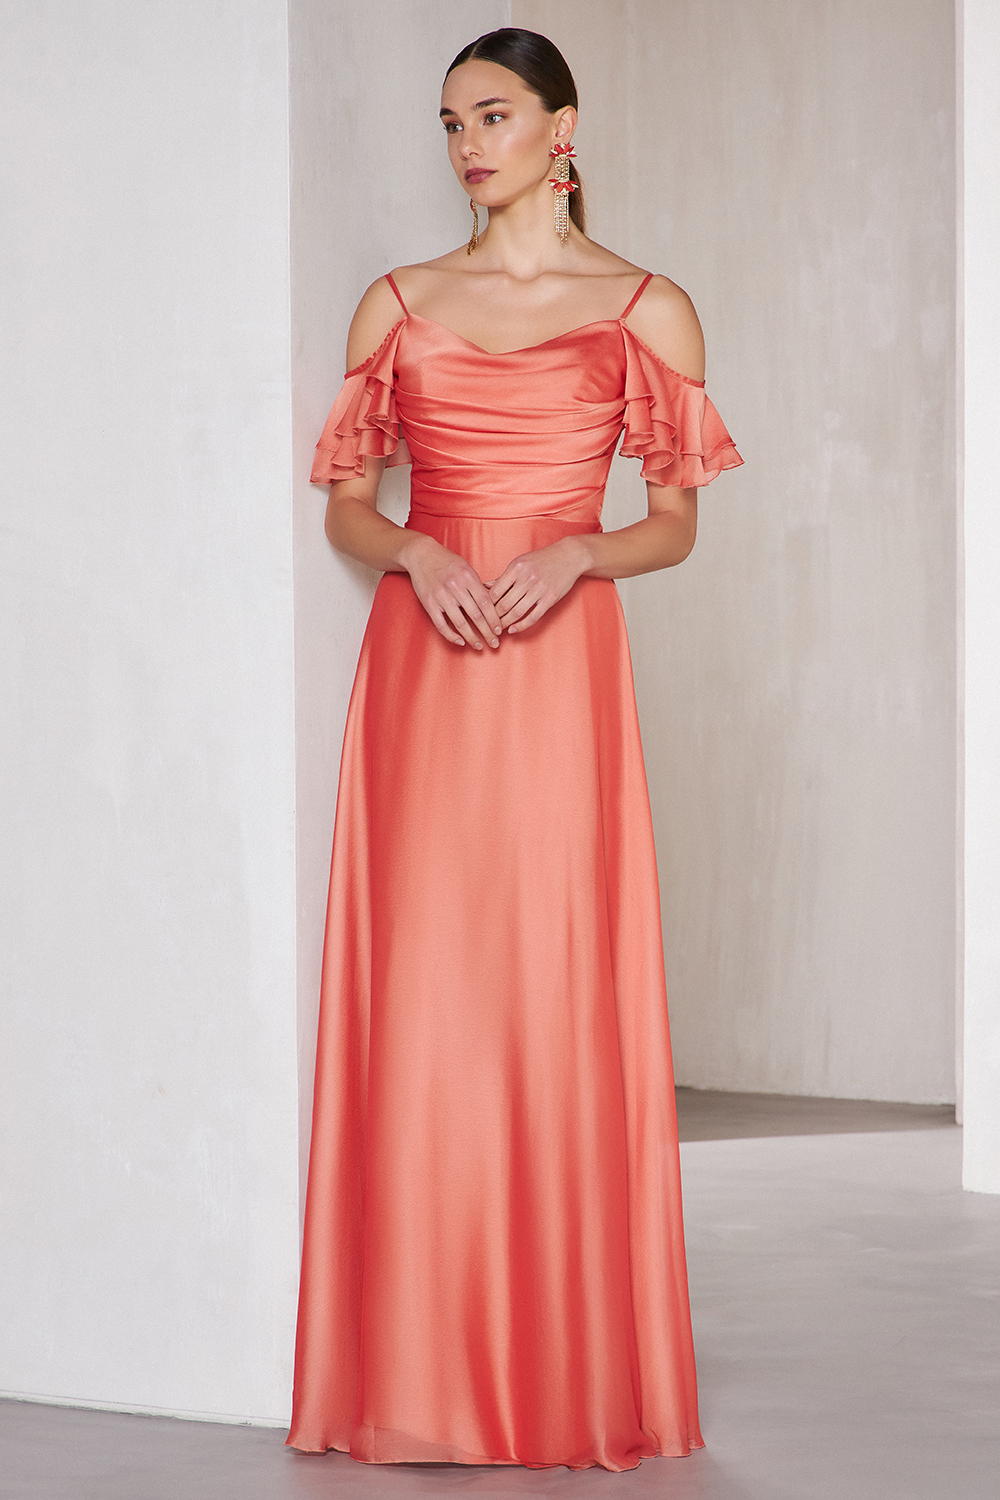 Long cocktail dress with shining fabric and sleeves